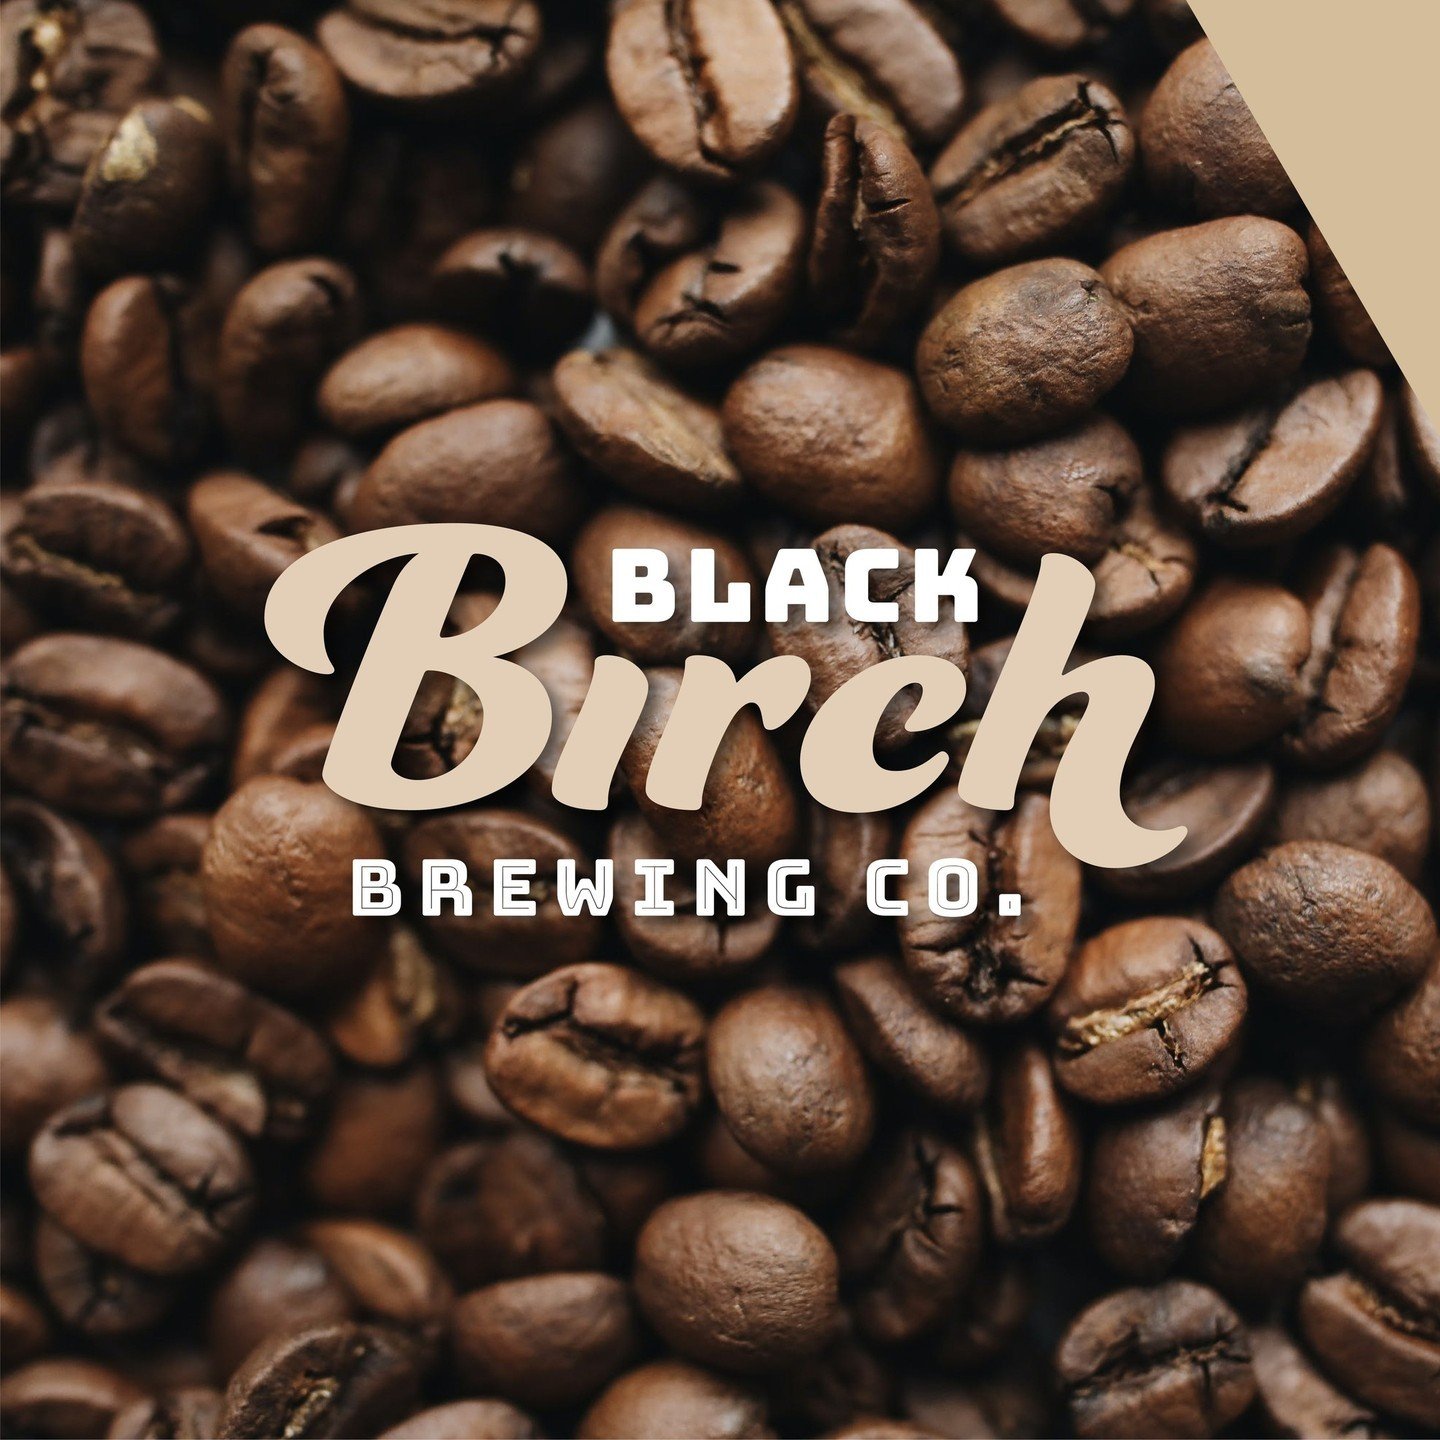 Logo &amp; Can Design |  Black Birch Brewing Co.⁠
Some days I just need a little extra coffee. For you coffee lovers, we have the Ground Up Coffee Stout. The warm and rich can design matches the beautiful color of this beer. Whimsical fonts paired to